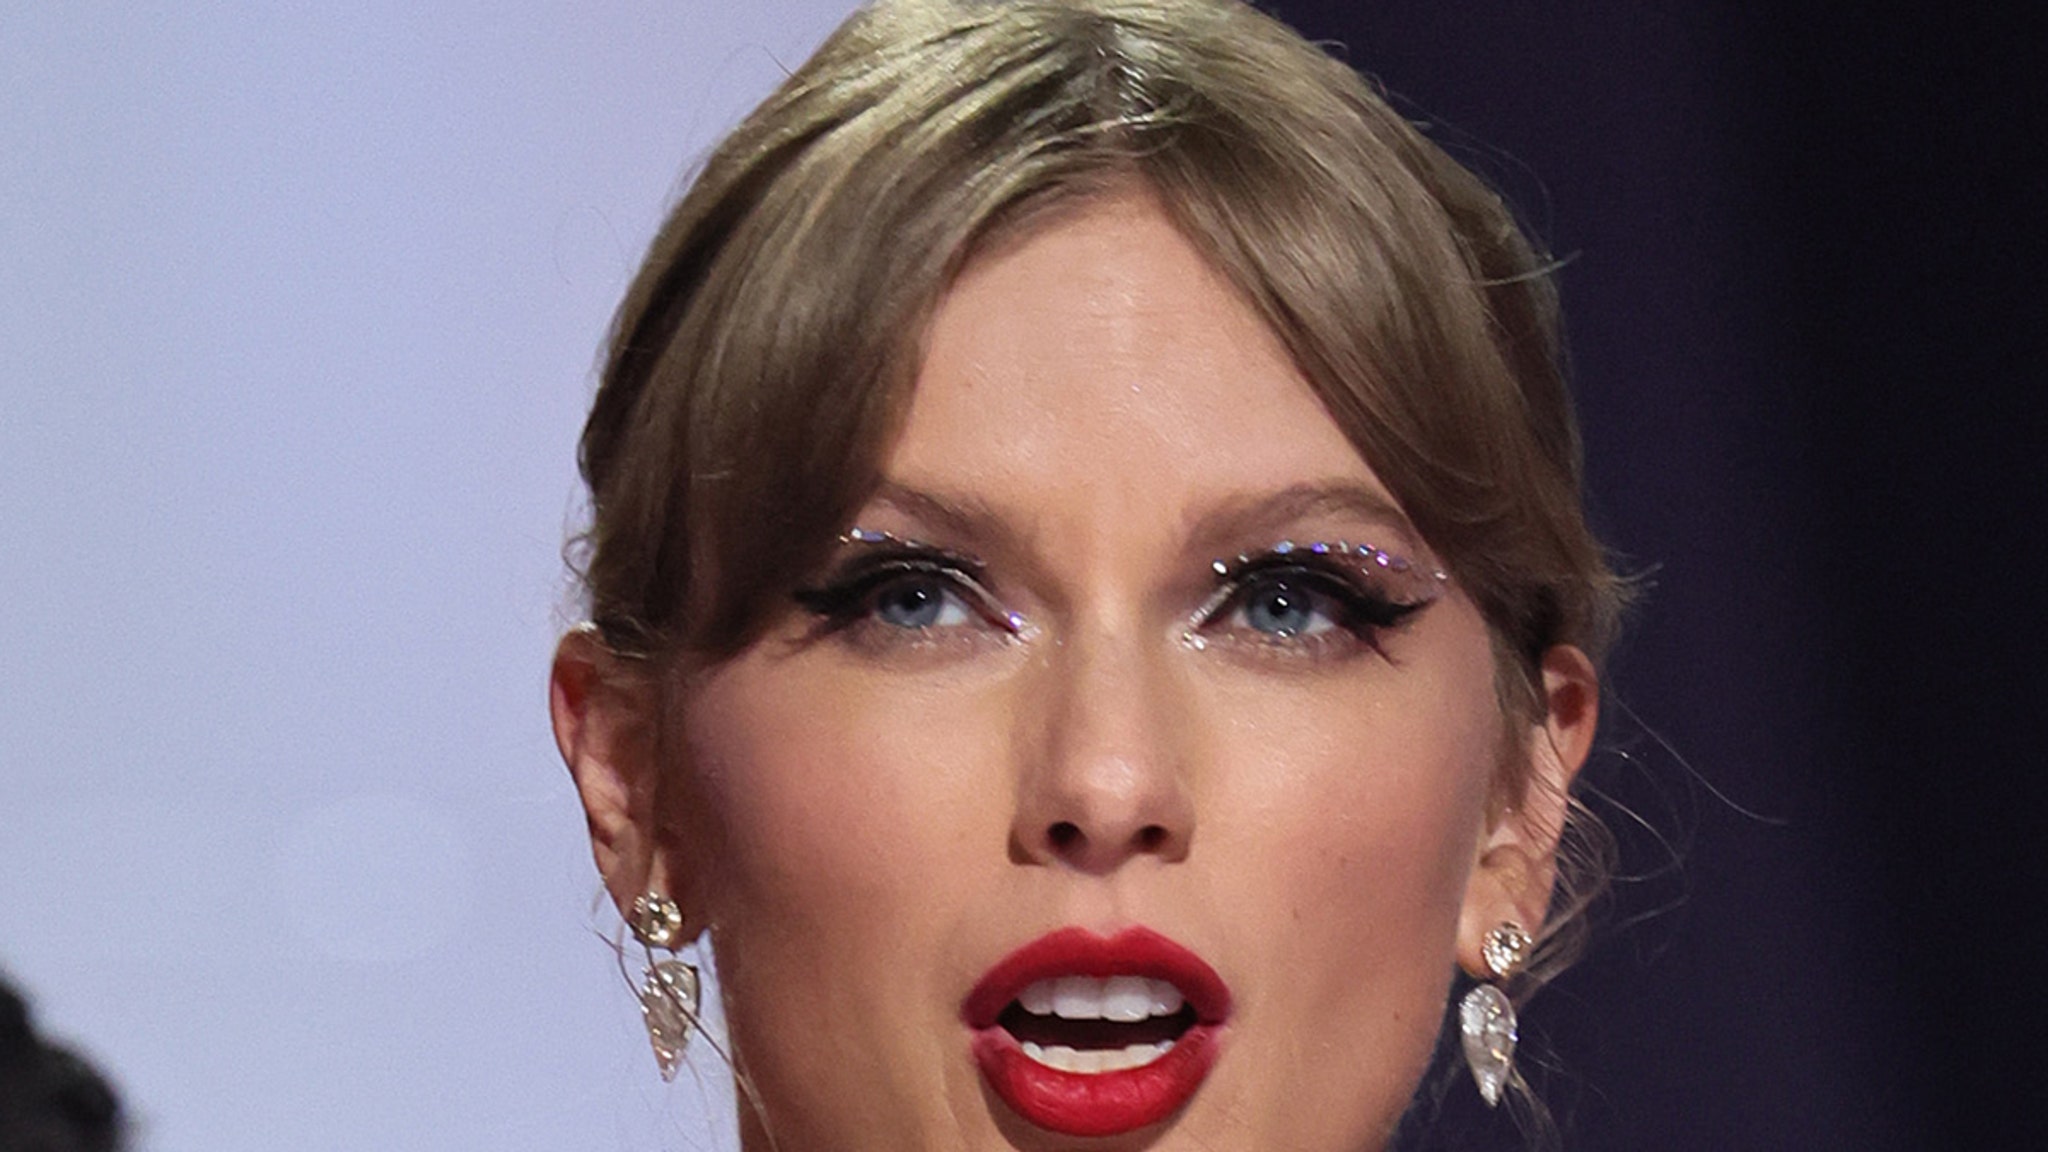 taylor-swift-blasted-for-saying-she-wants-to-live-in-1830s-in-new-song